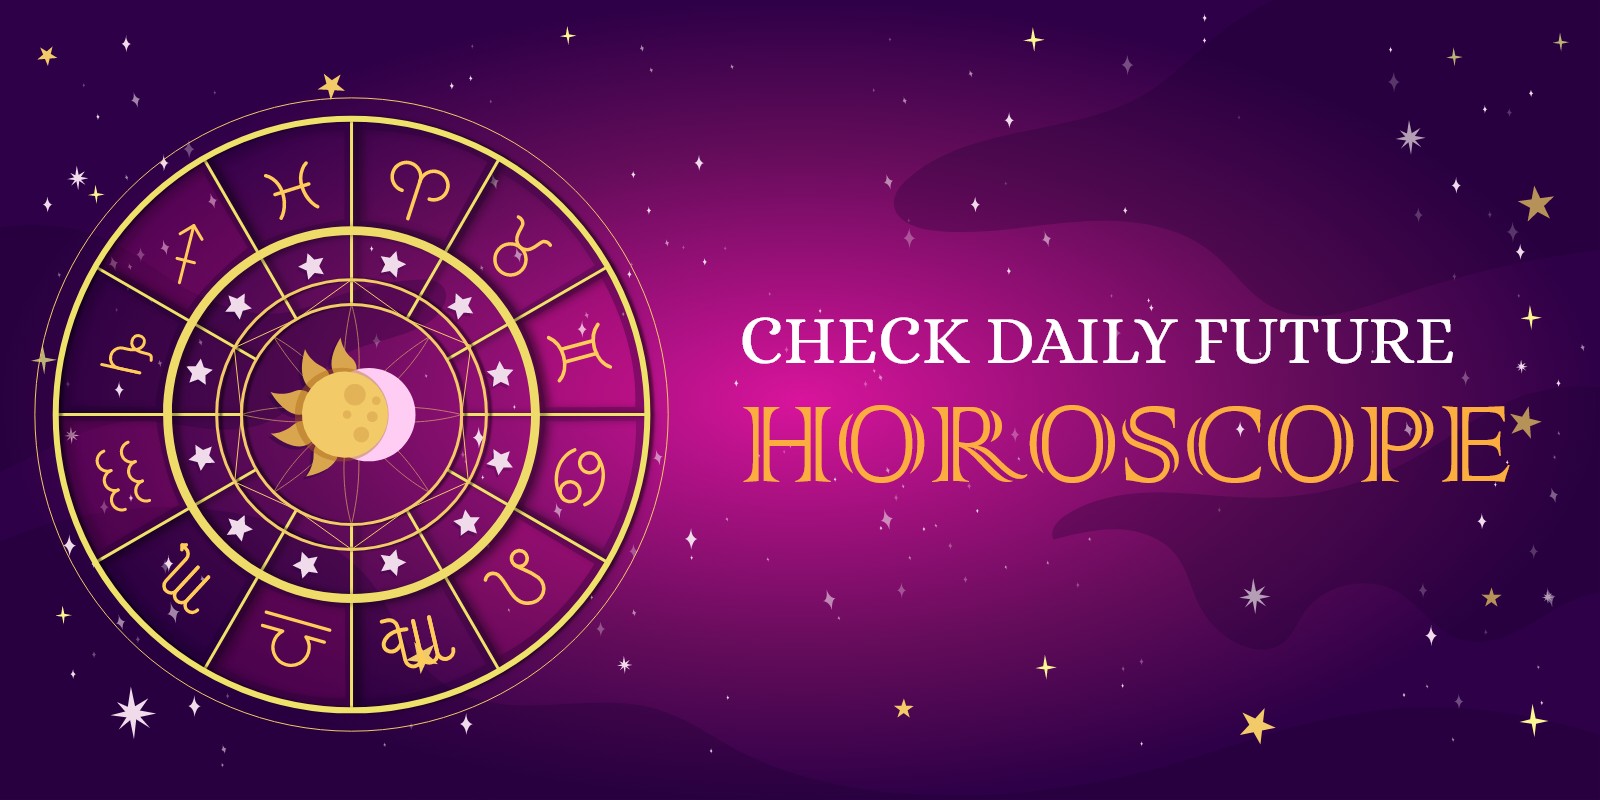 My Horoscope - Android App Template by Initiotechmedia | Codester